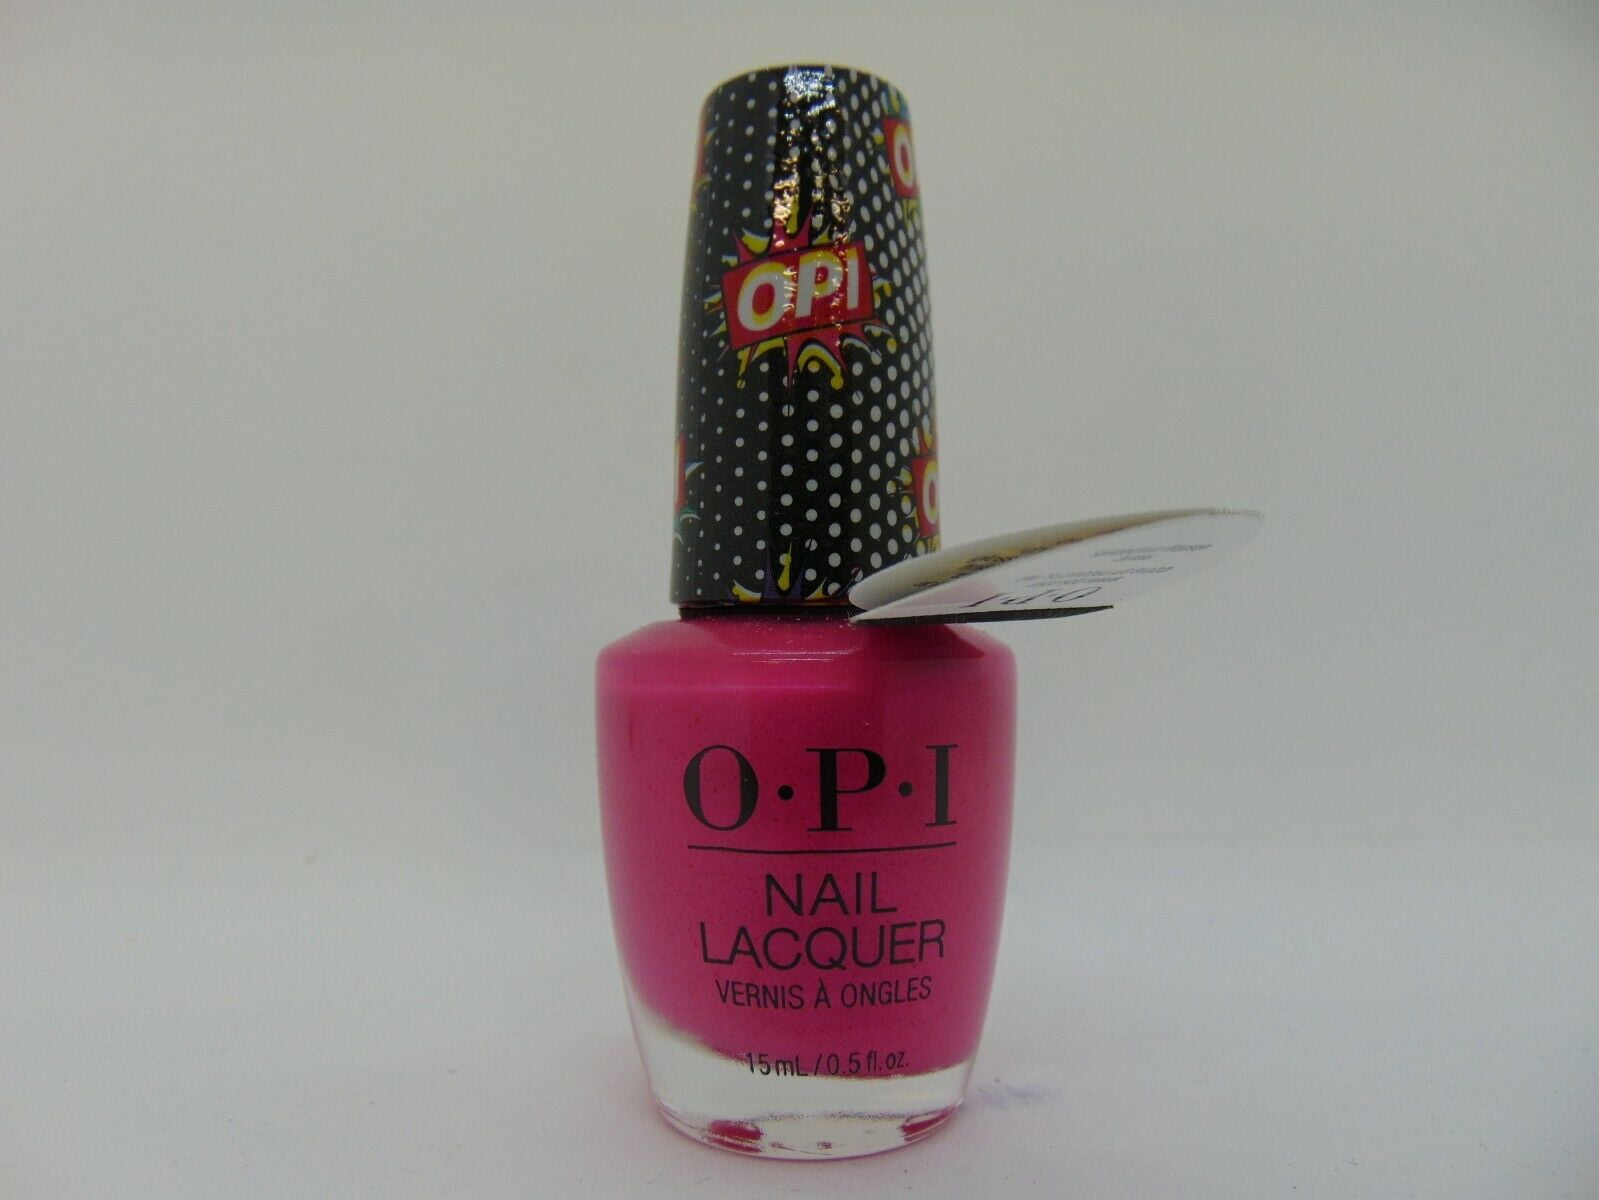 3. OPI Nail Lacquer, Argan Oil Infused Nail Color - wide 6